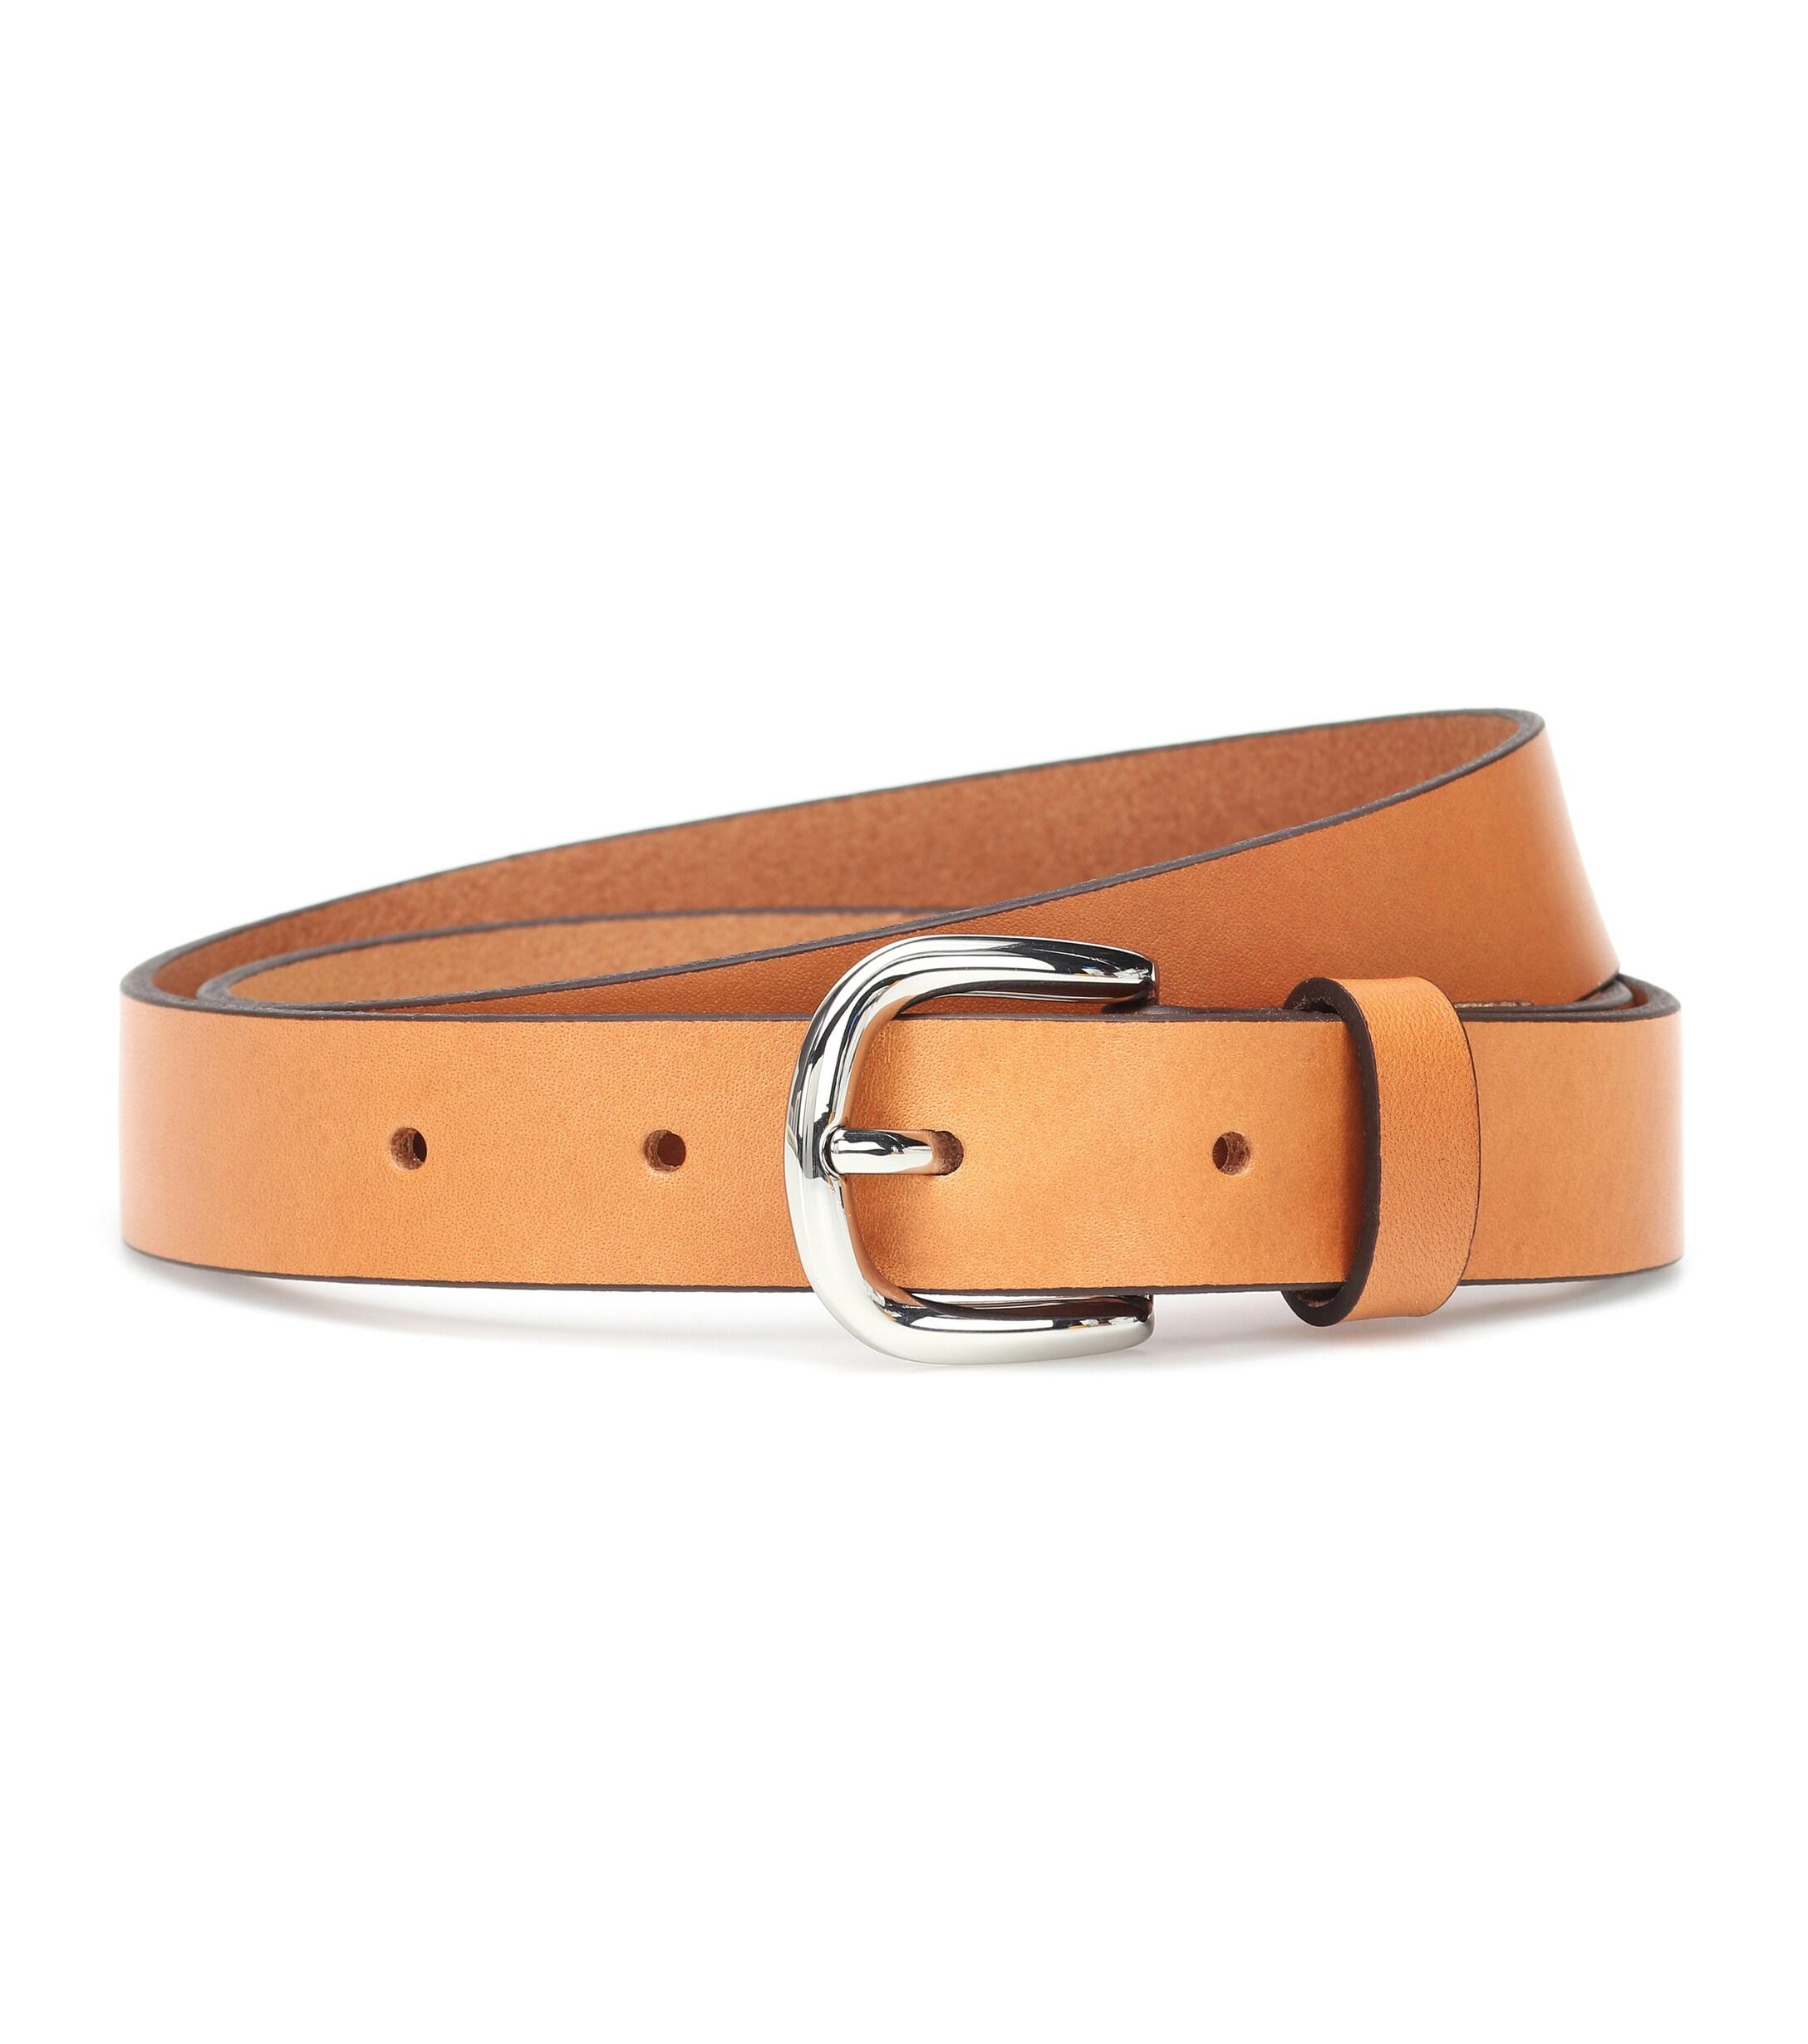 Isabel Marant Zap Leather Belt in Natural - Lyst